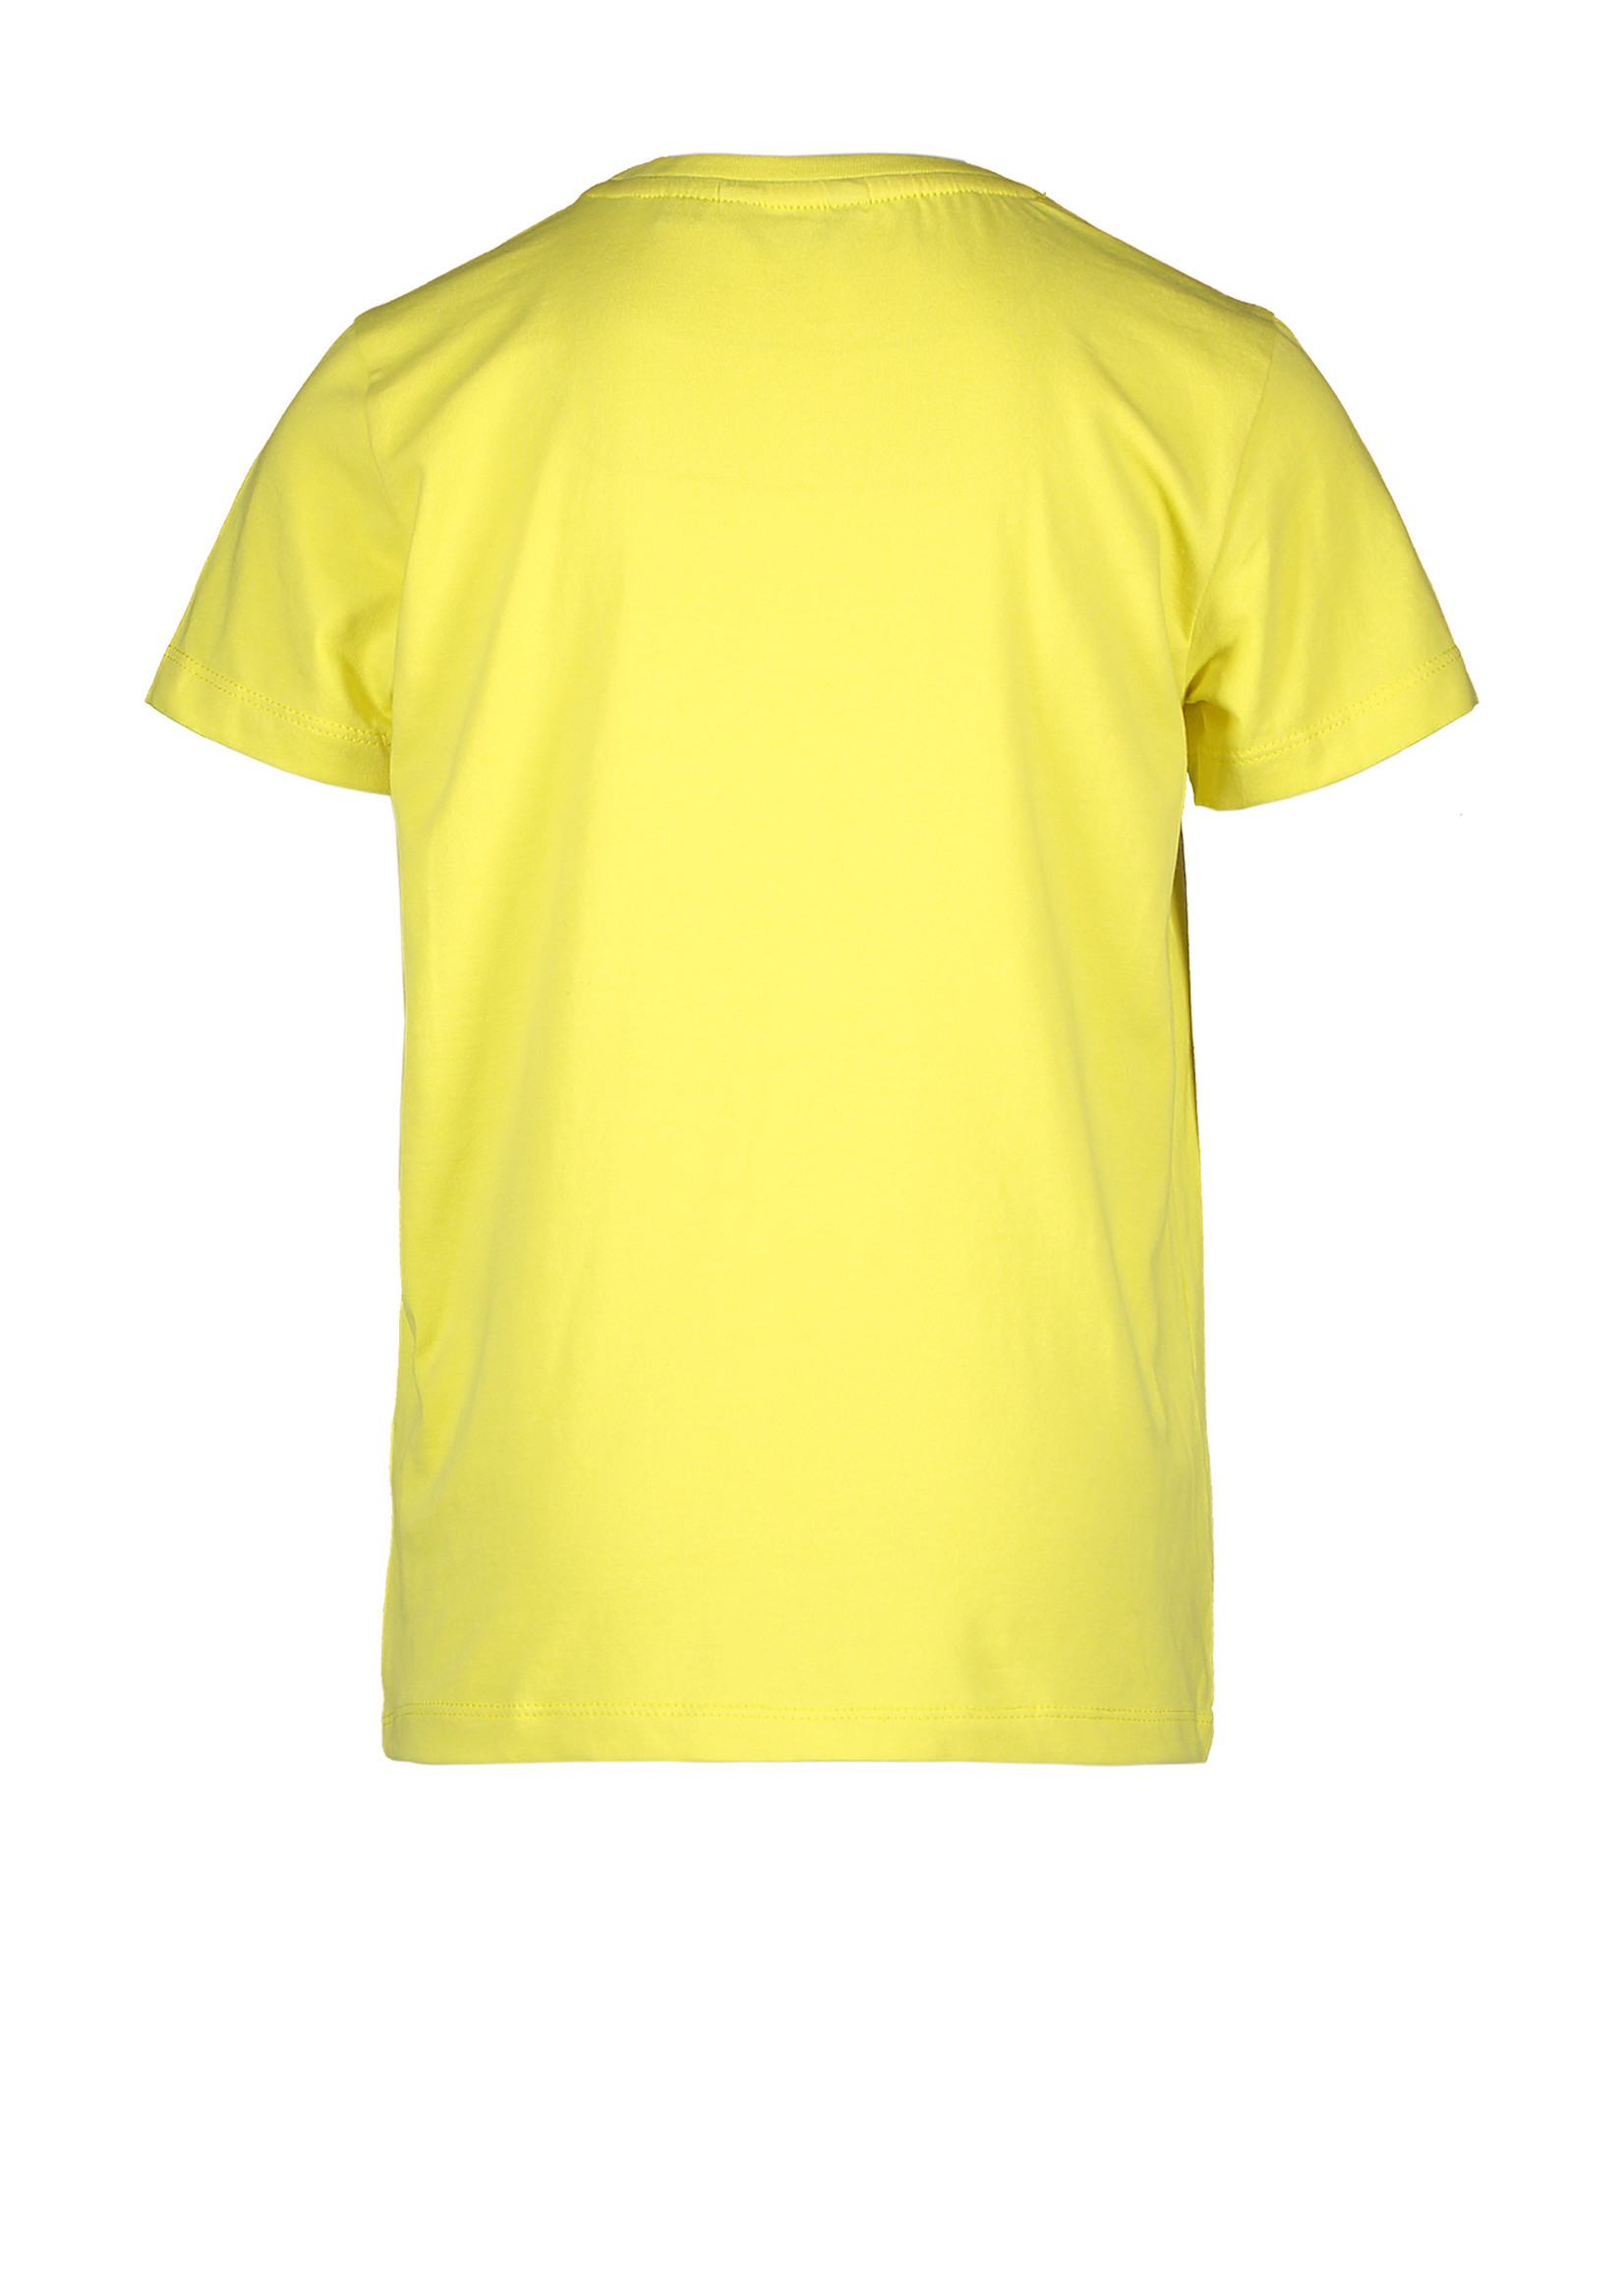 MT t-shirt chestprint, Washed Yellow